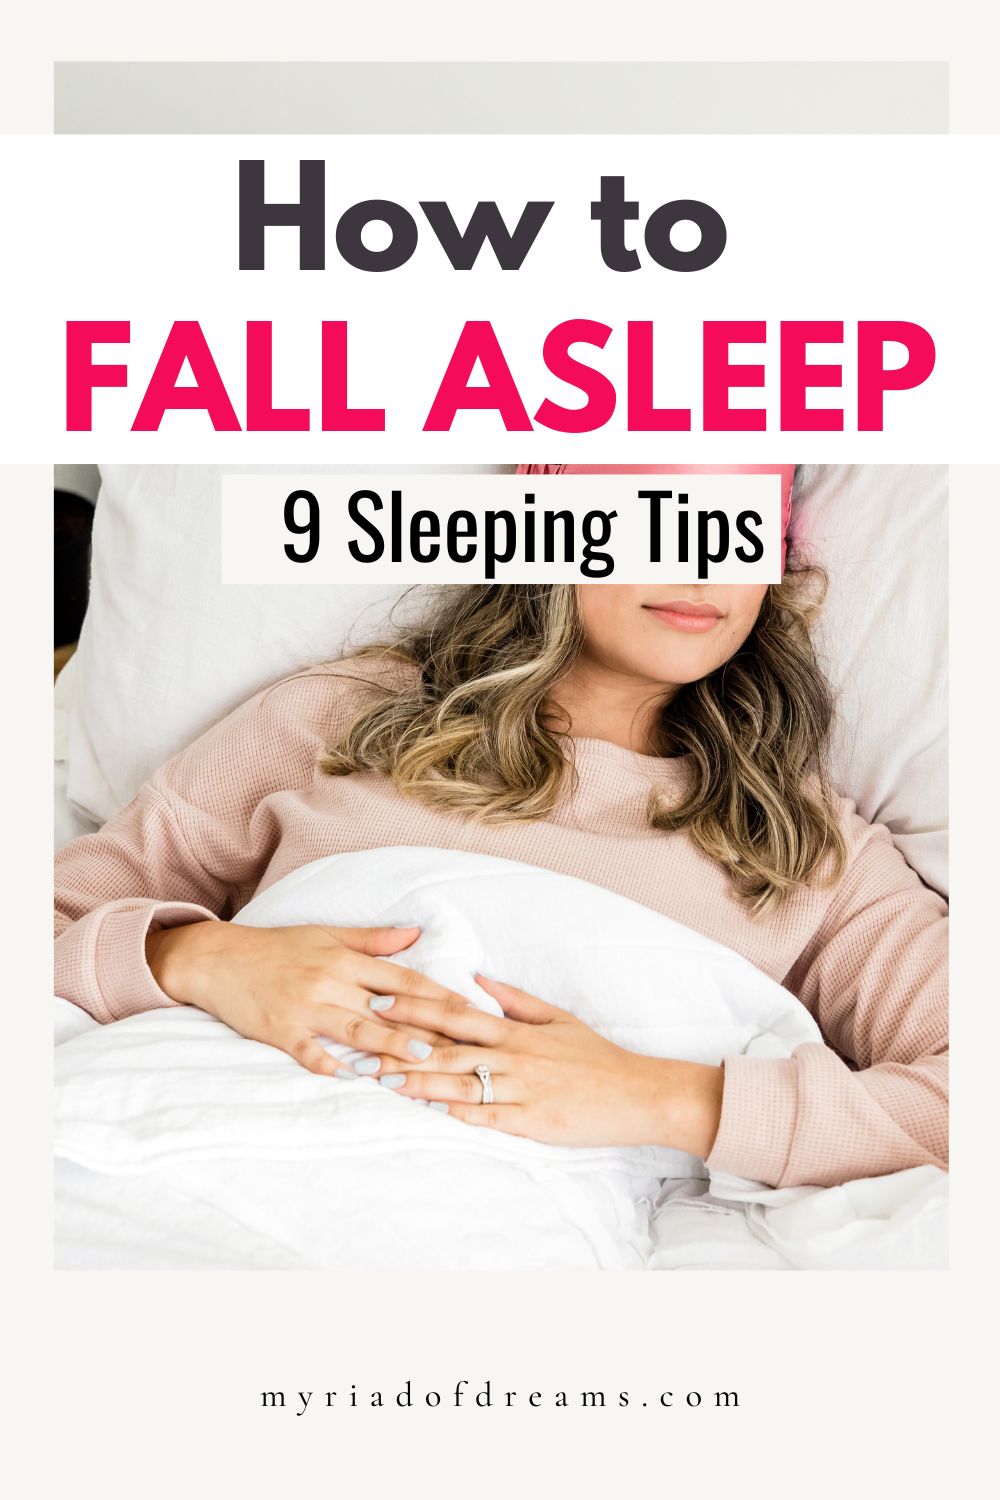 How to sleep when you are a night owl. 9 sleeping tips to help you sleep better and faster.